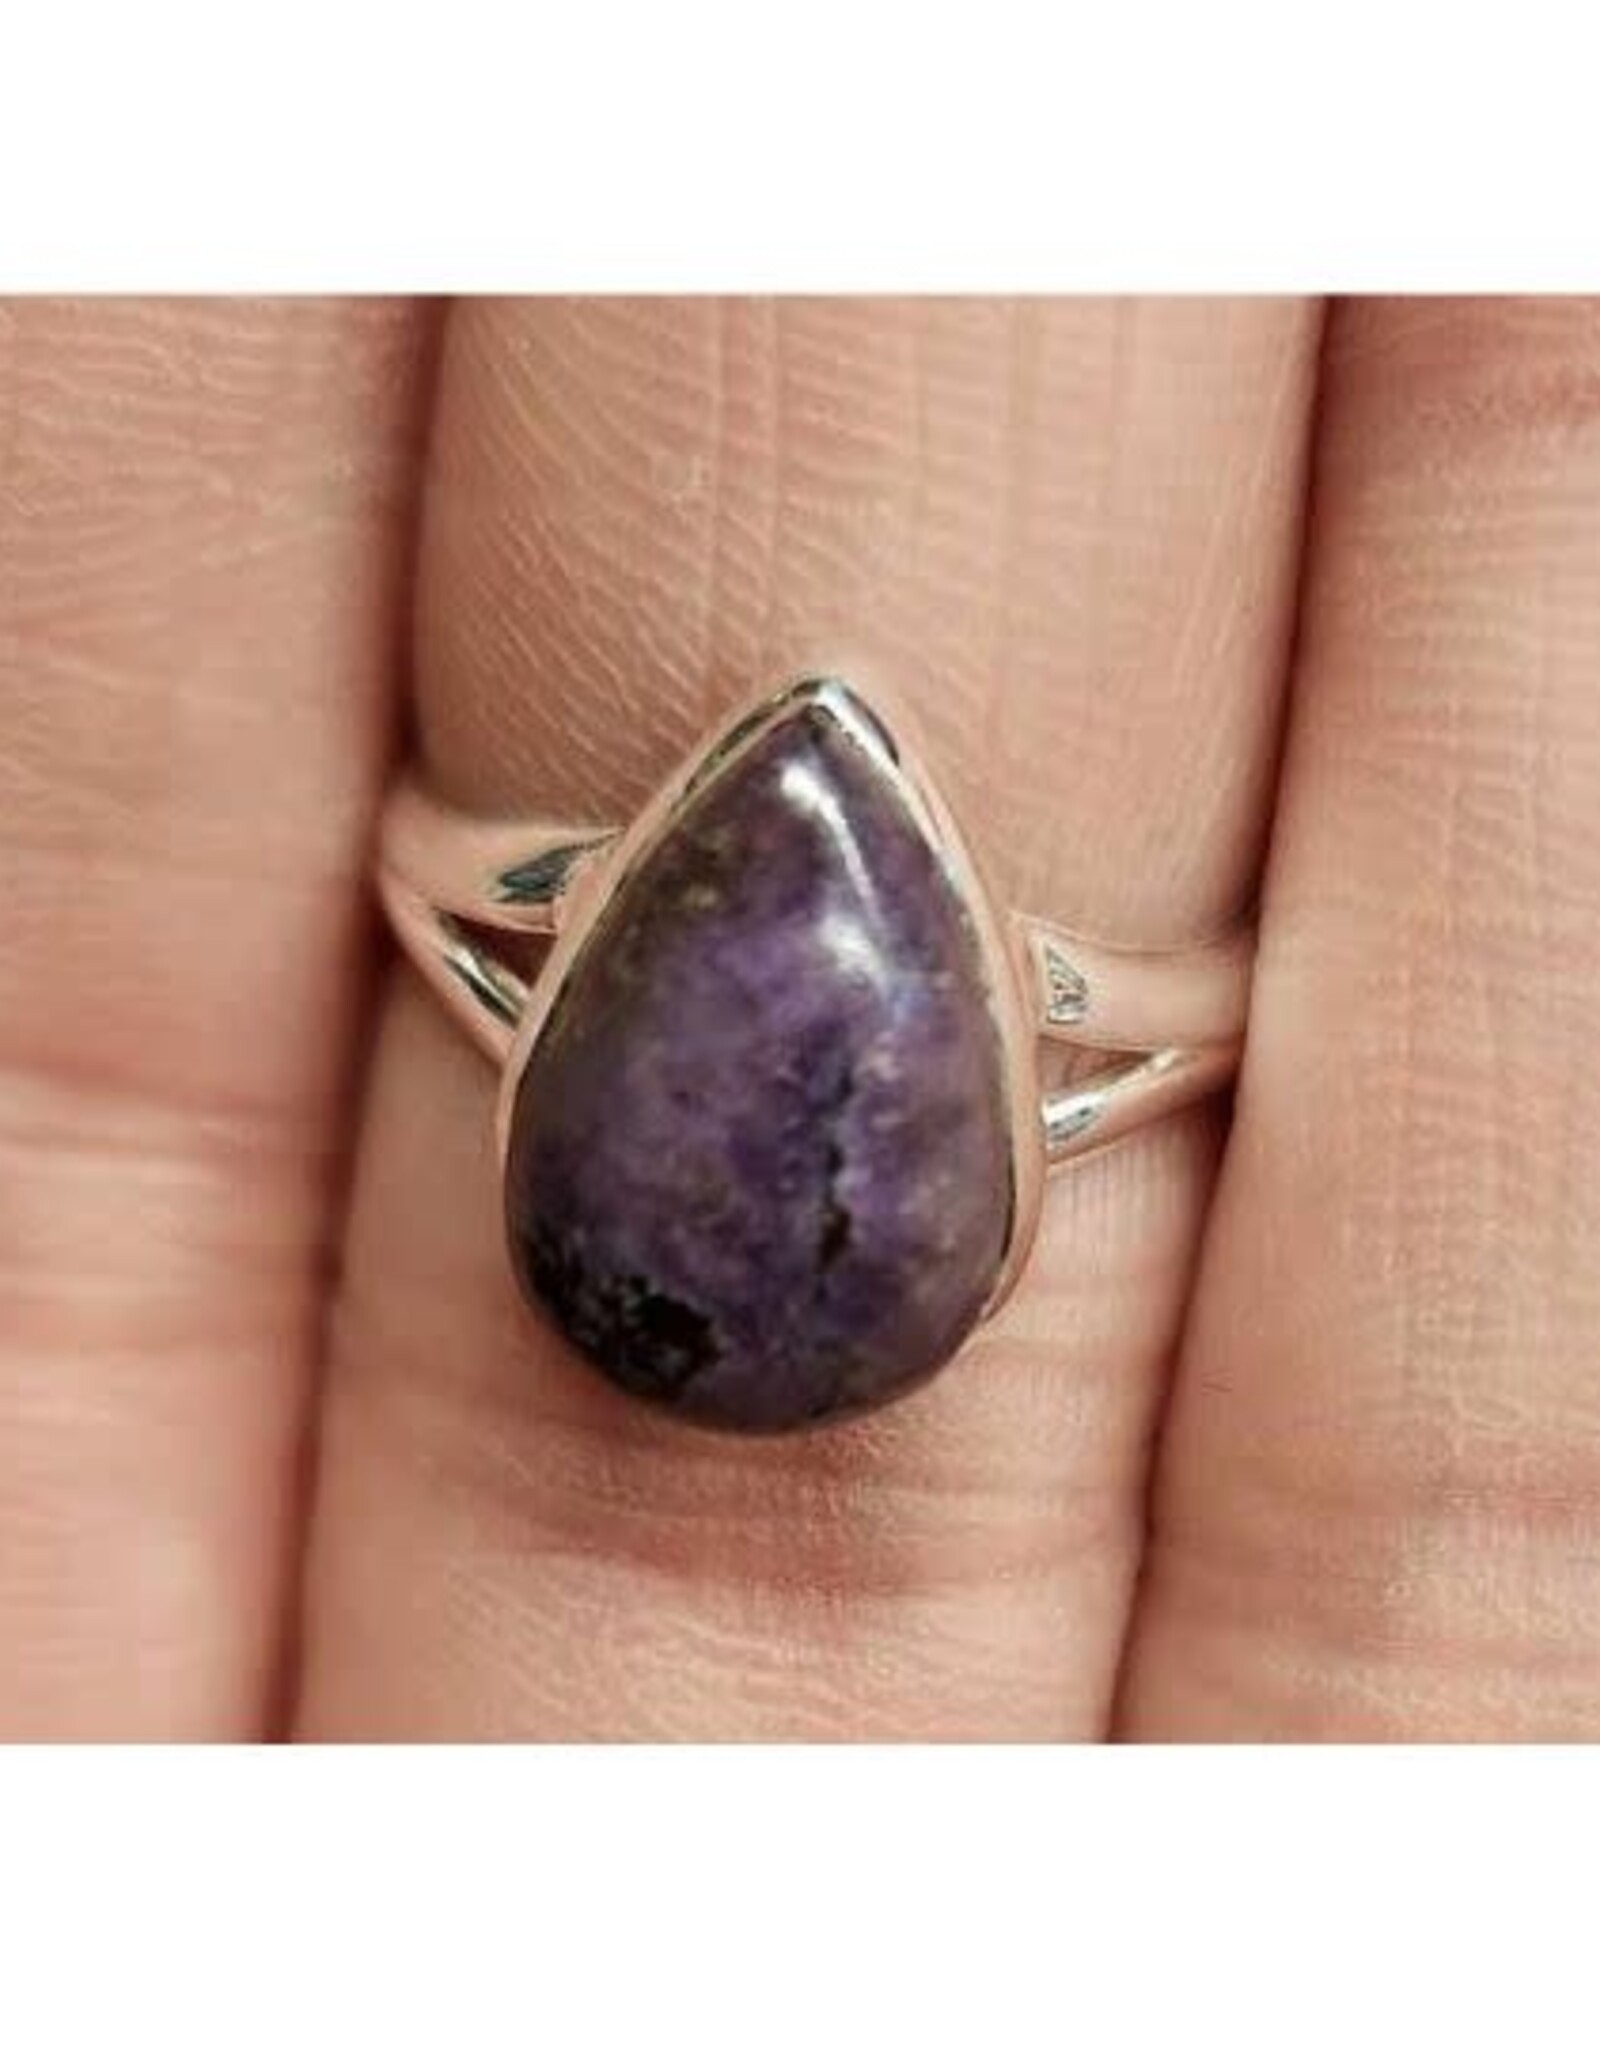 Sugilite Ring - Size 7 Sterling Silver